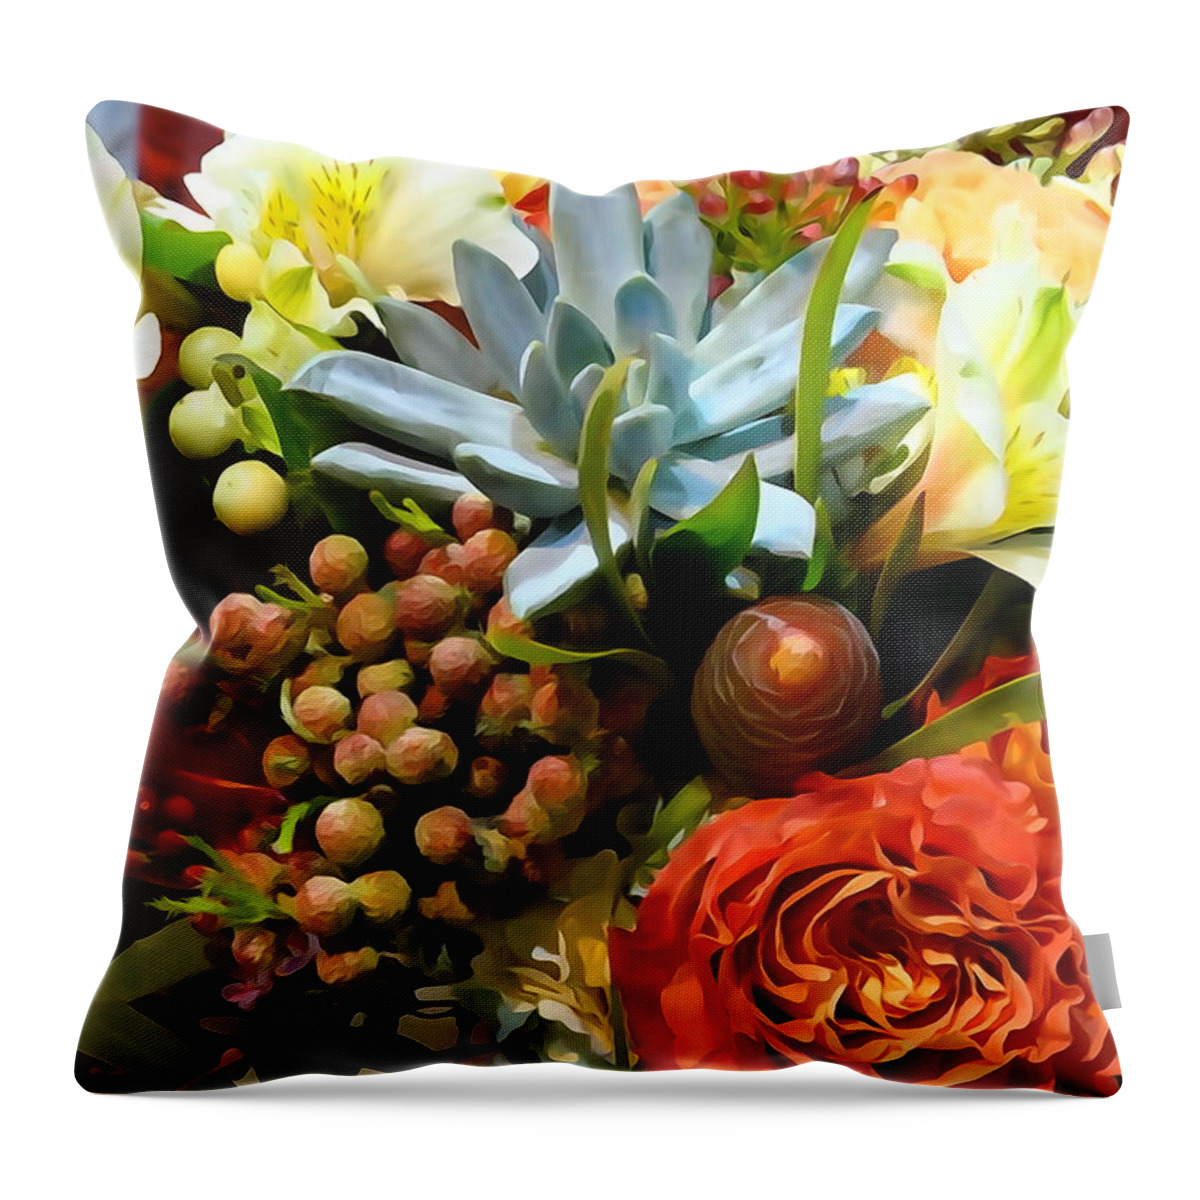 Floral Throw Pillow featuring the photograph Floral Arrangement 1 by David T Wilkinson